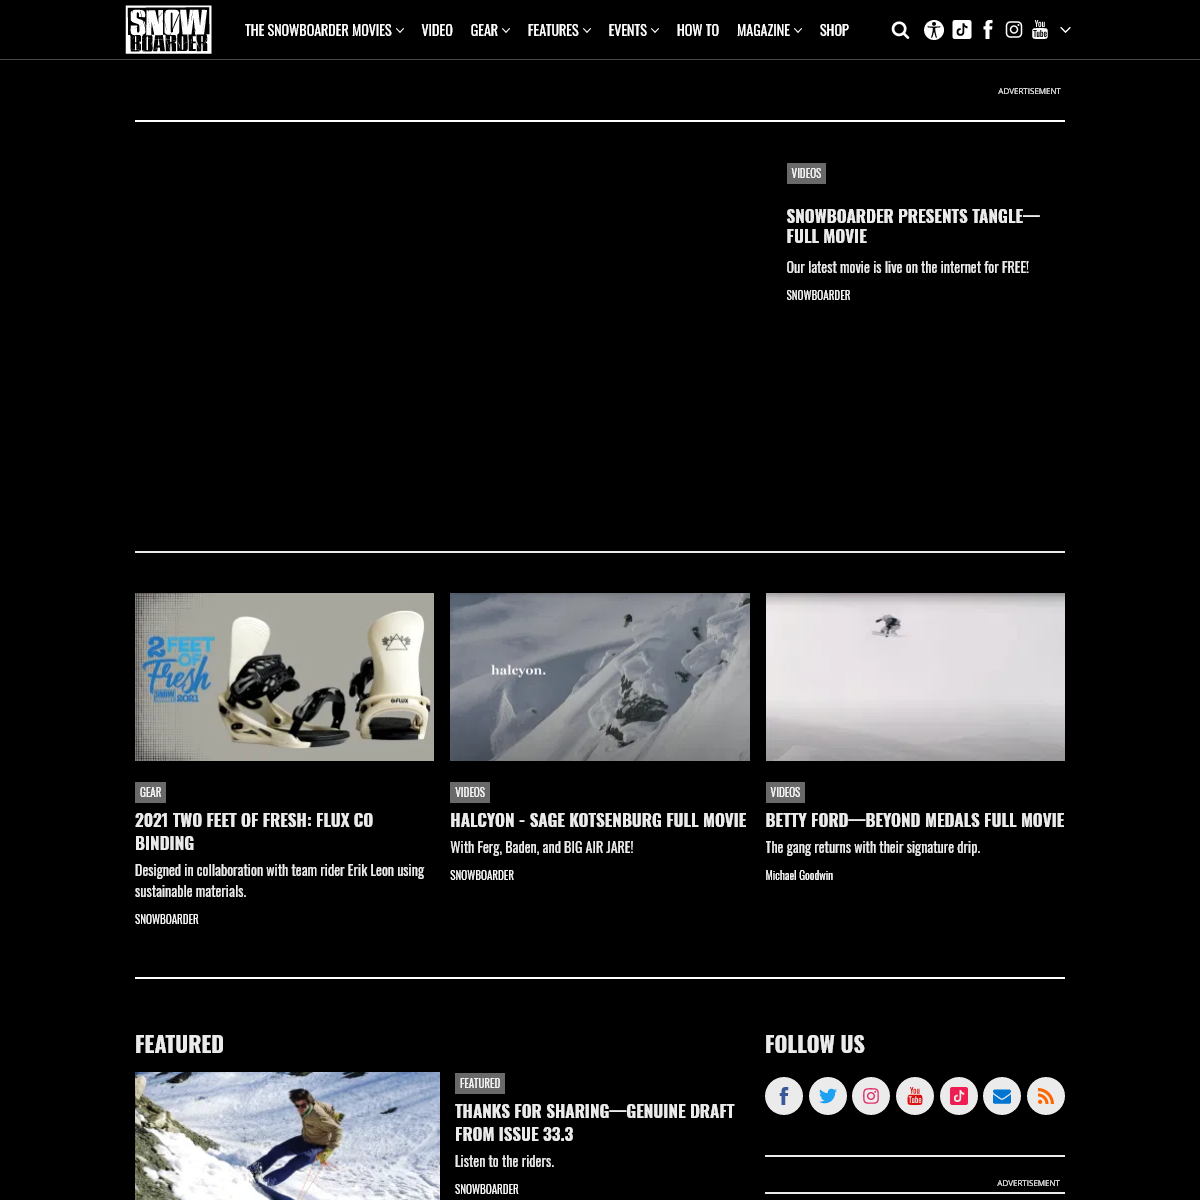 A complete backup of snowboarder.com